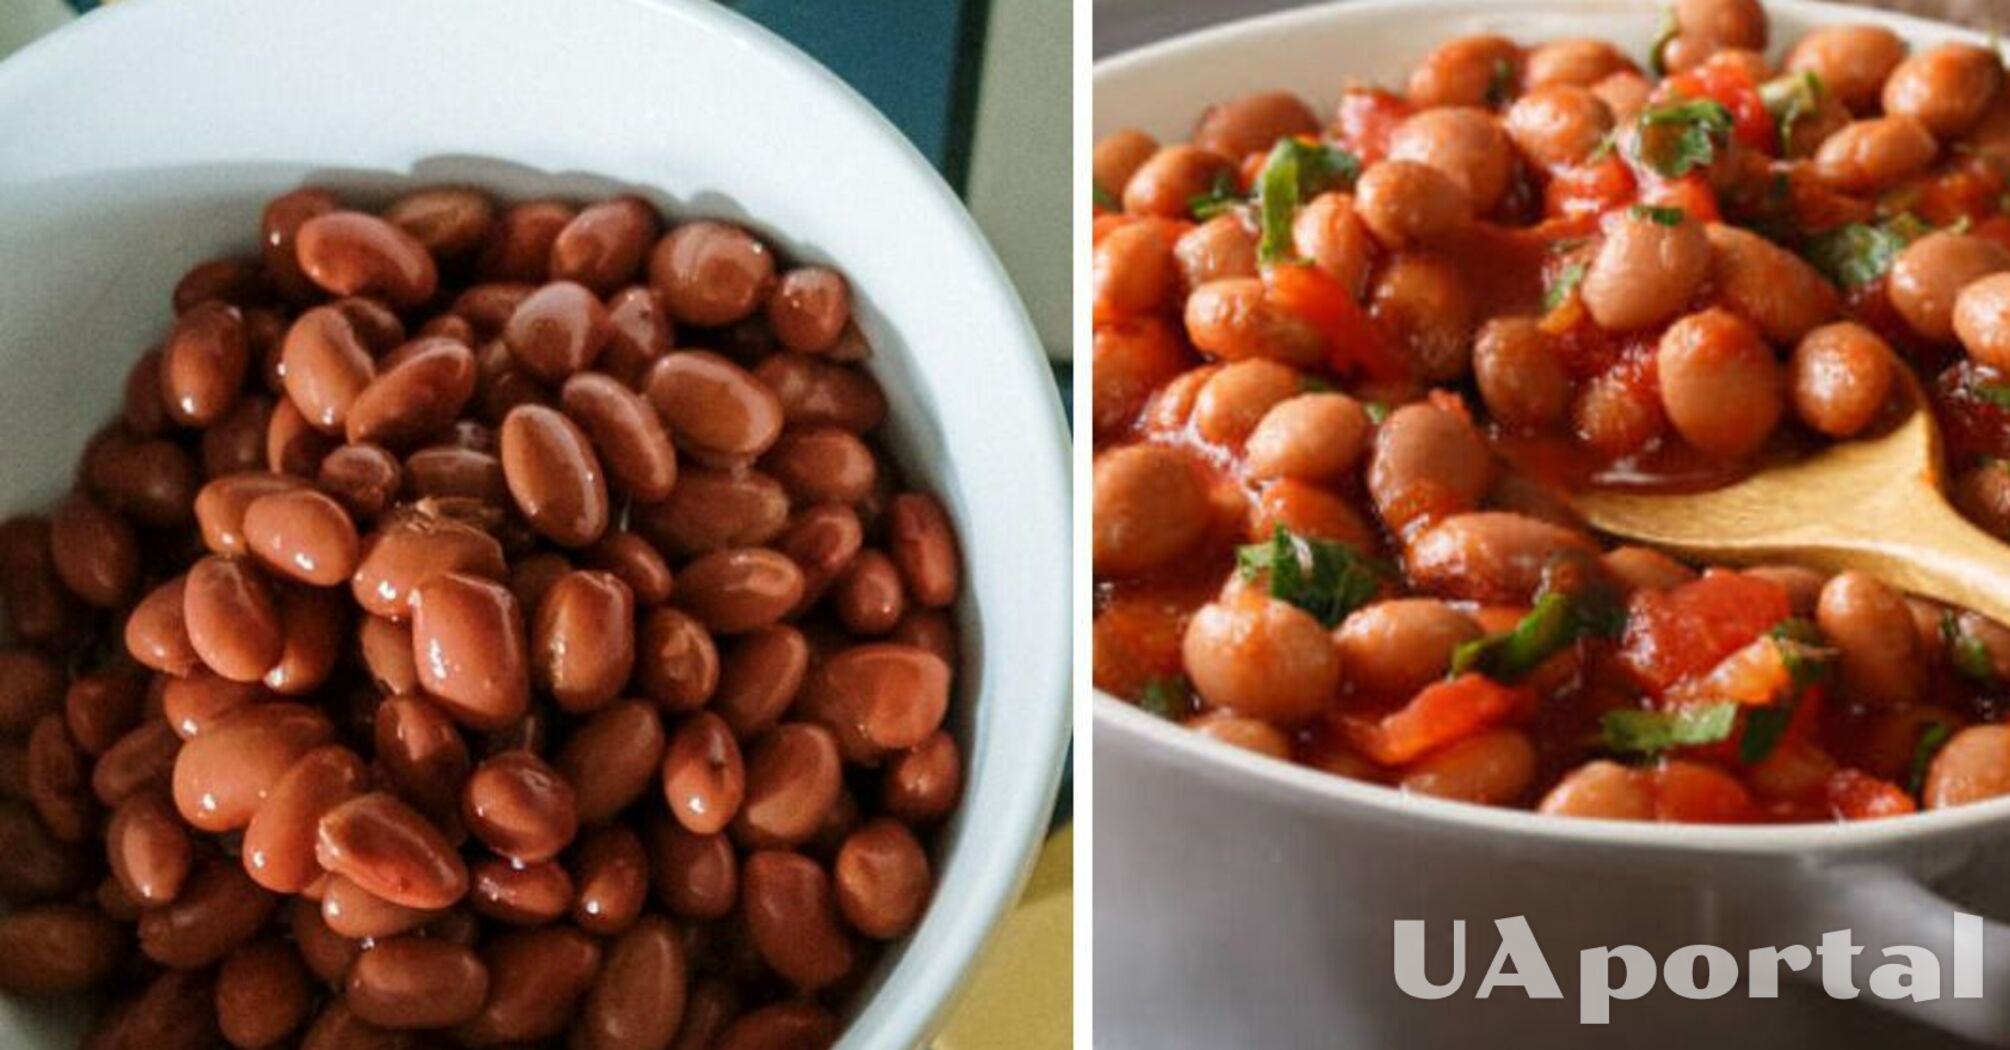 How to cook beans deliciously: the secret ingredient that will improve the dish